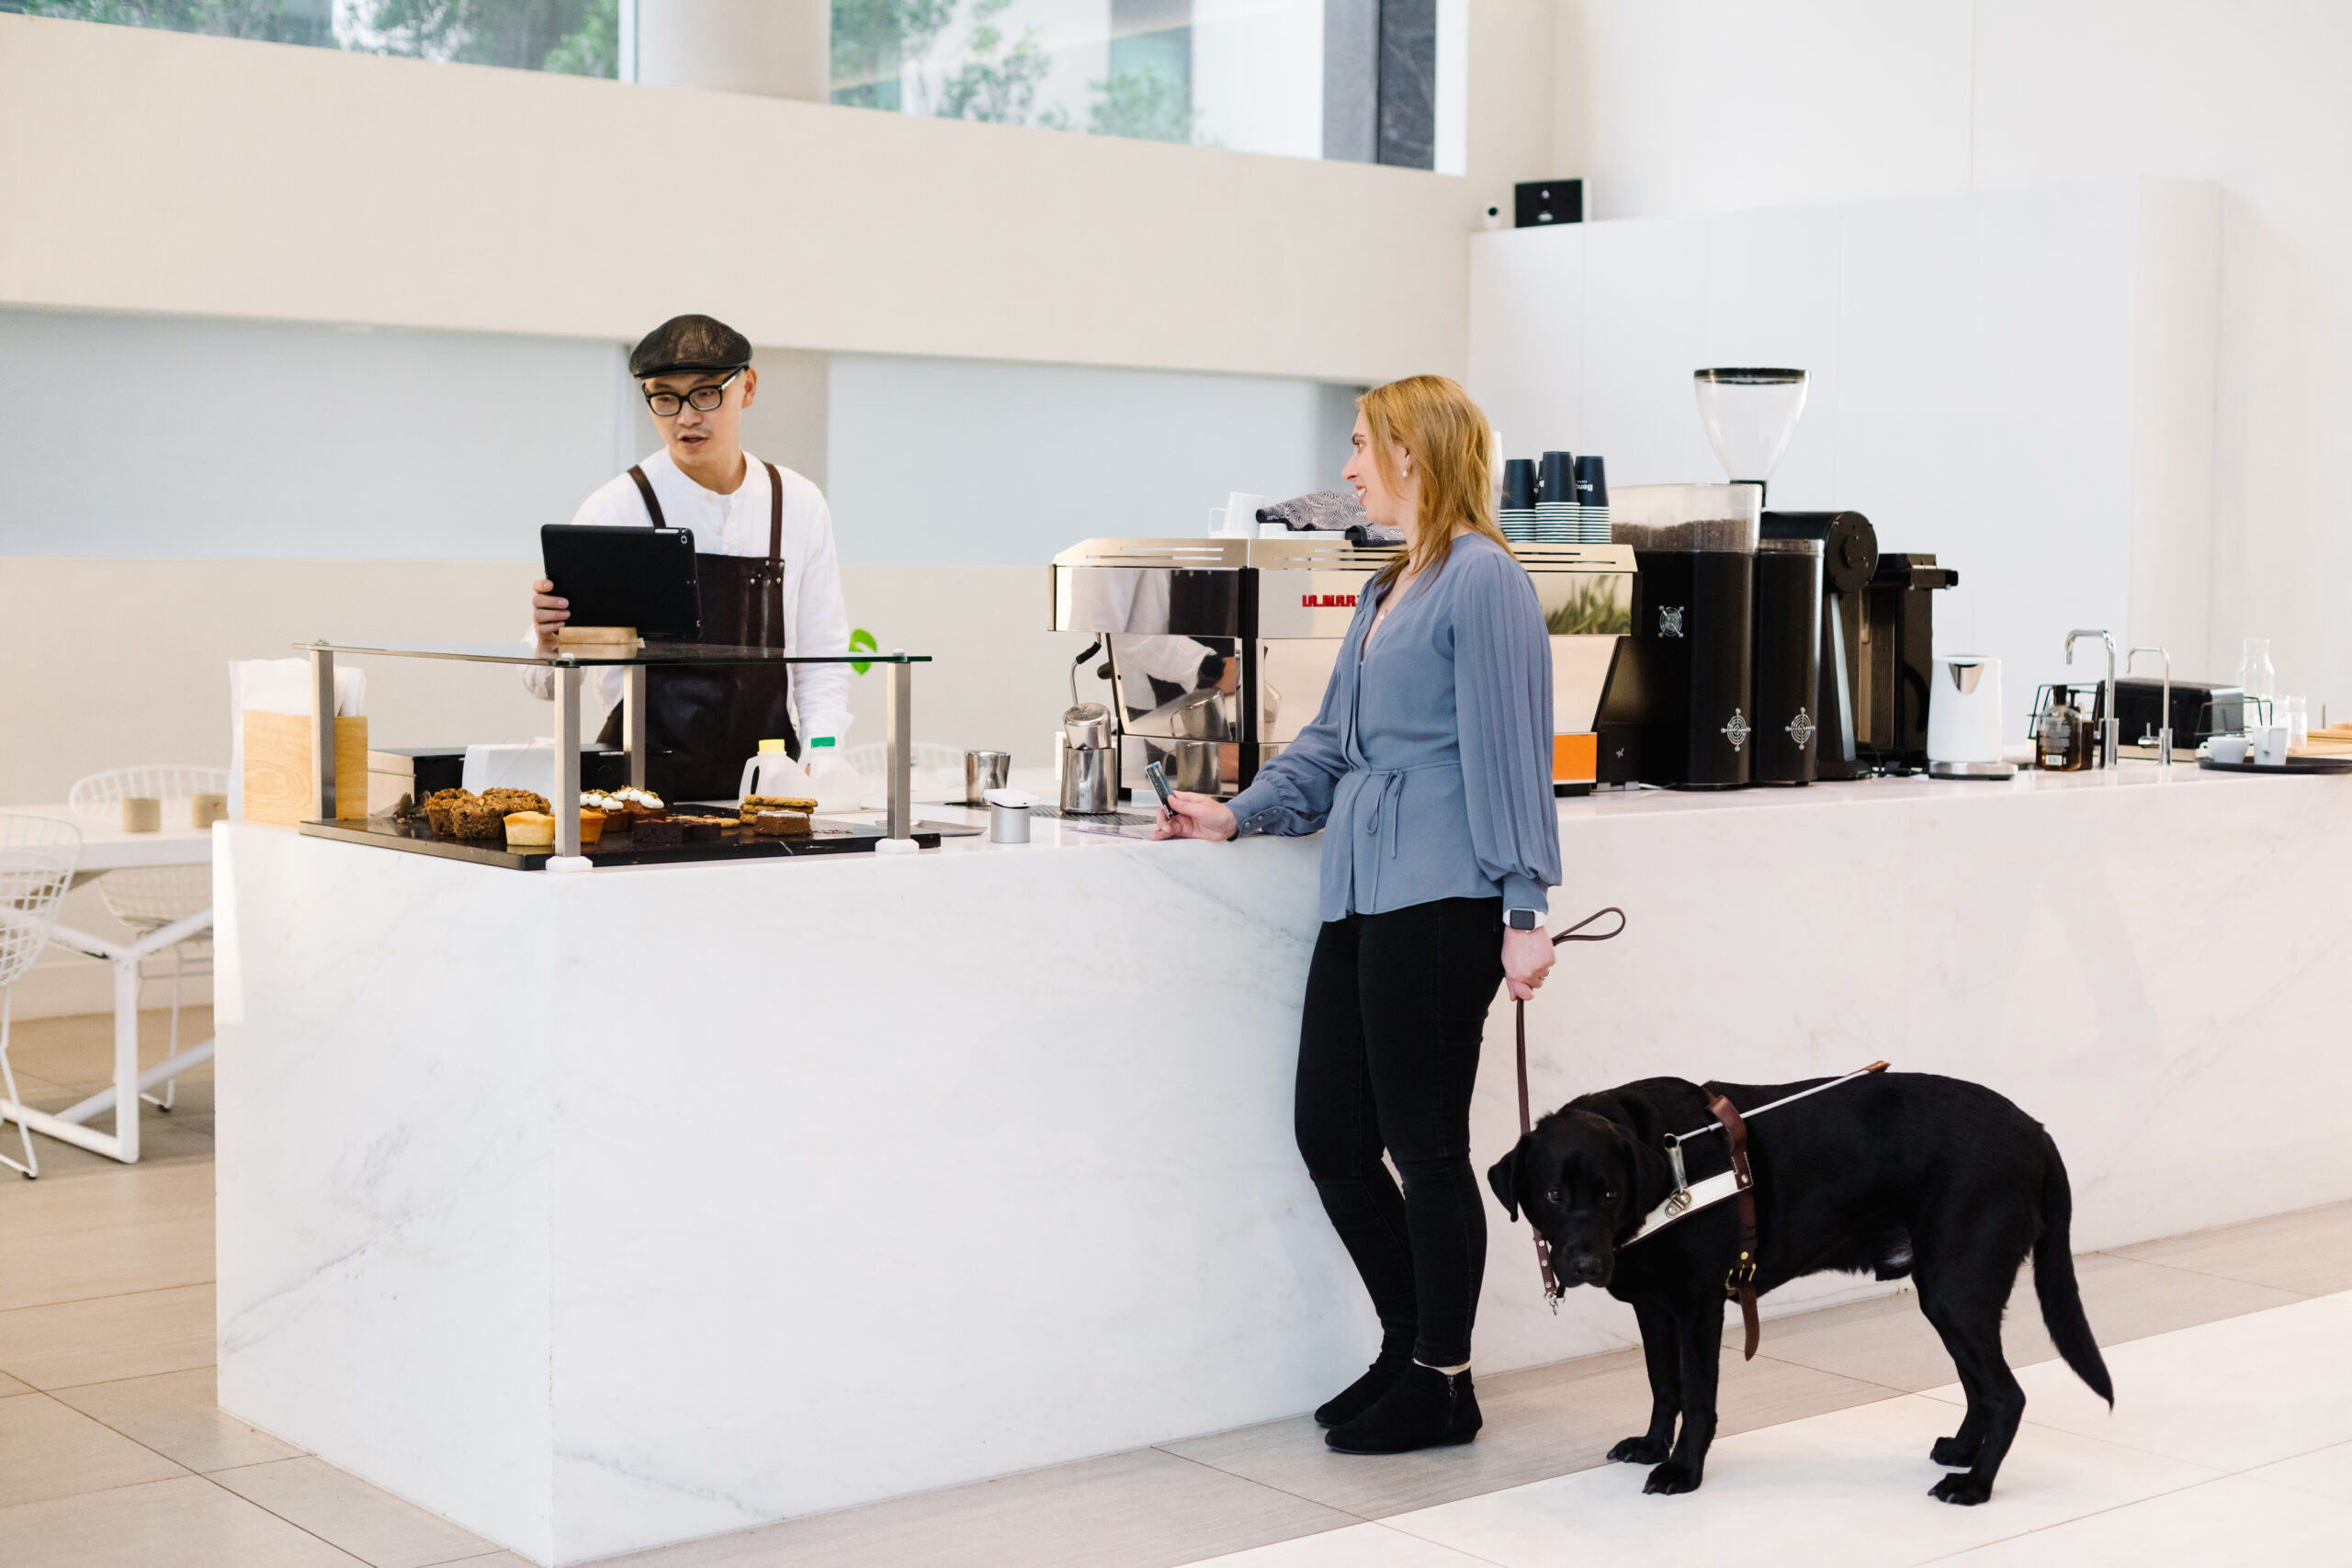 A Caucasian woman with blonde hair, dressed in a blue shirt and black pants, stands at a cafe counter with her guide dog. She is speaking with the barista, a man wearing a white shirt and a black hat. The barista is behind the counter, looking at his screen and typing while conversing with the woman.